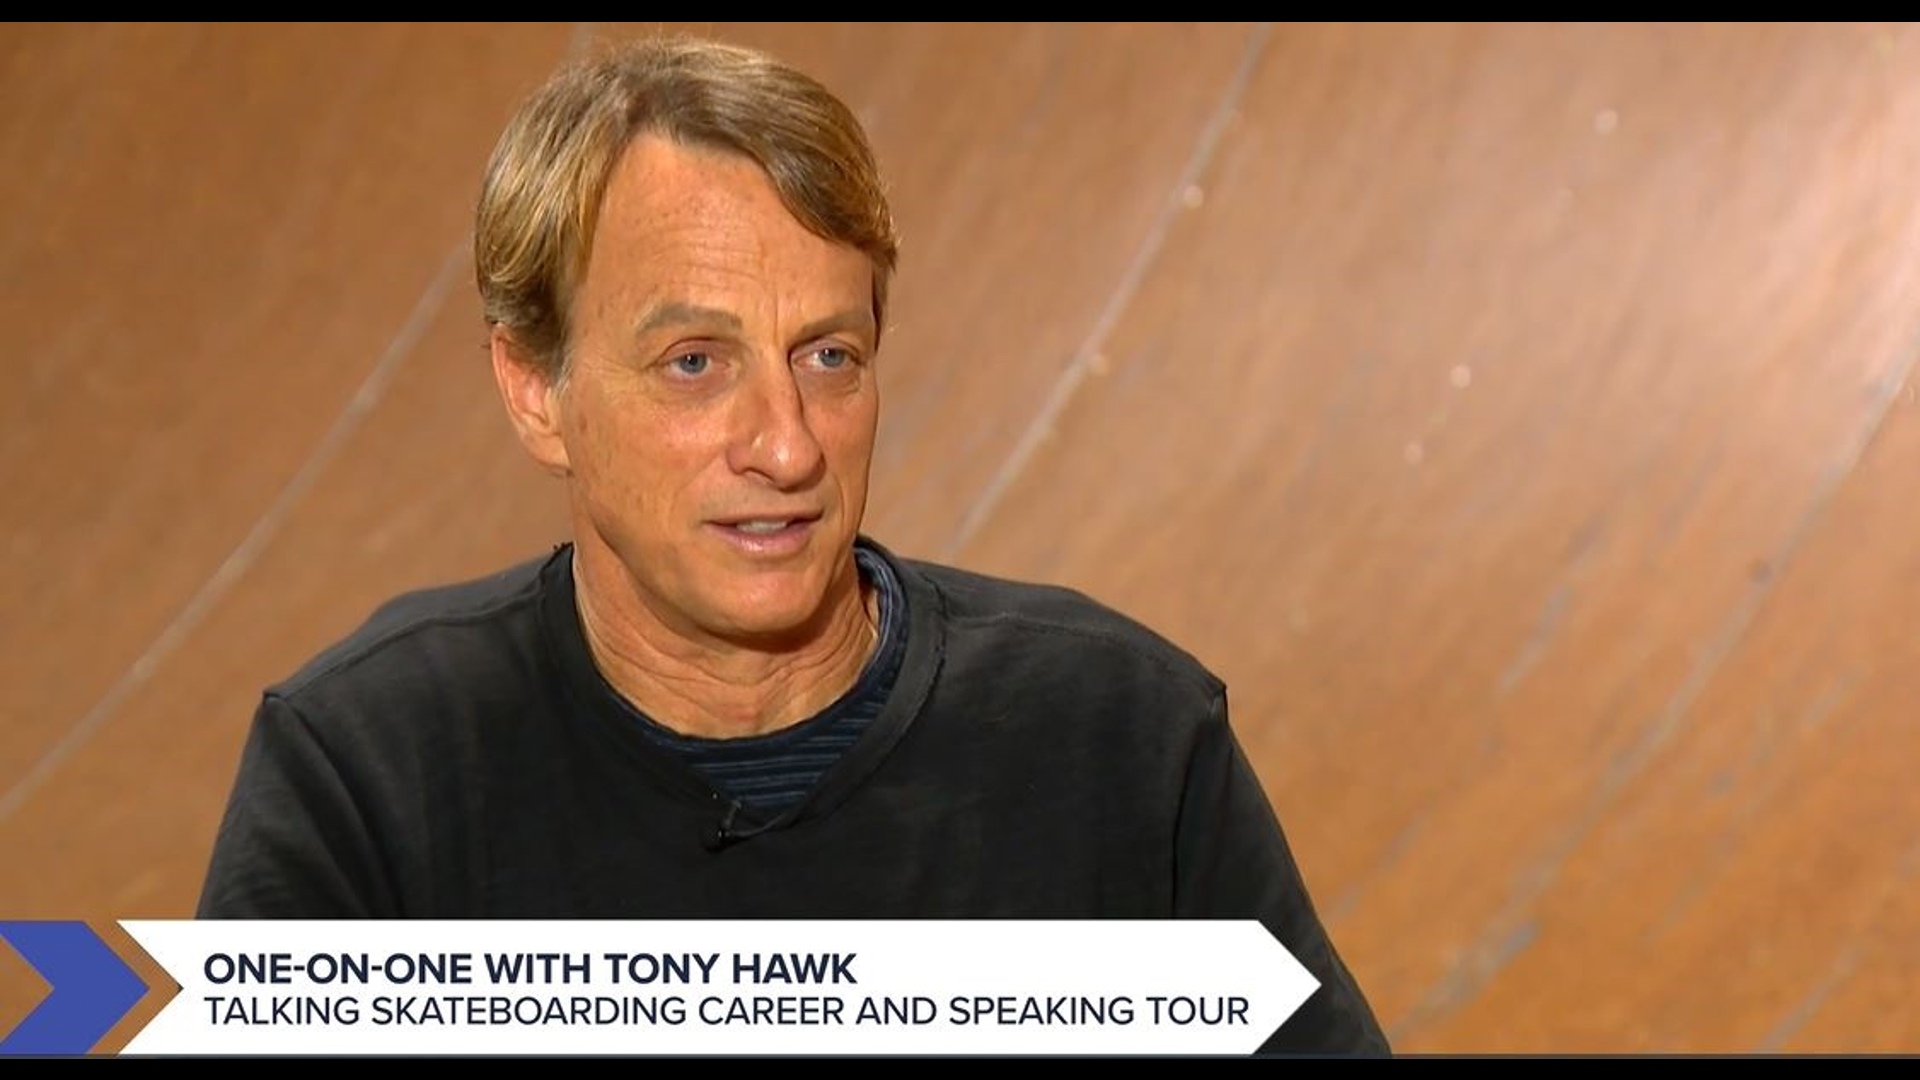 An extended one-on-one interview with skateboarding icon Tony Hawk. He discusses his career, upcoming speaking tour, family and more.